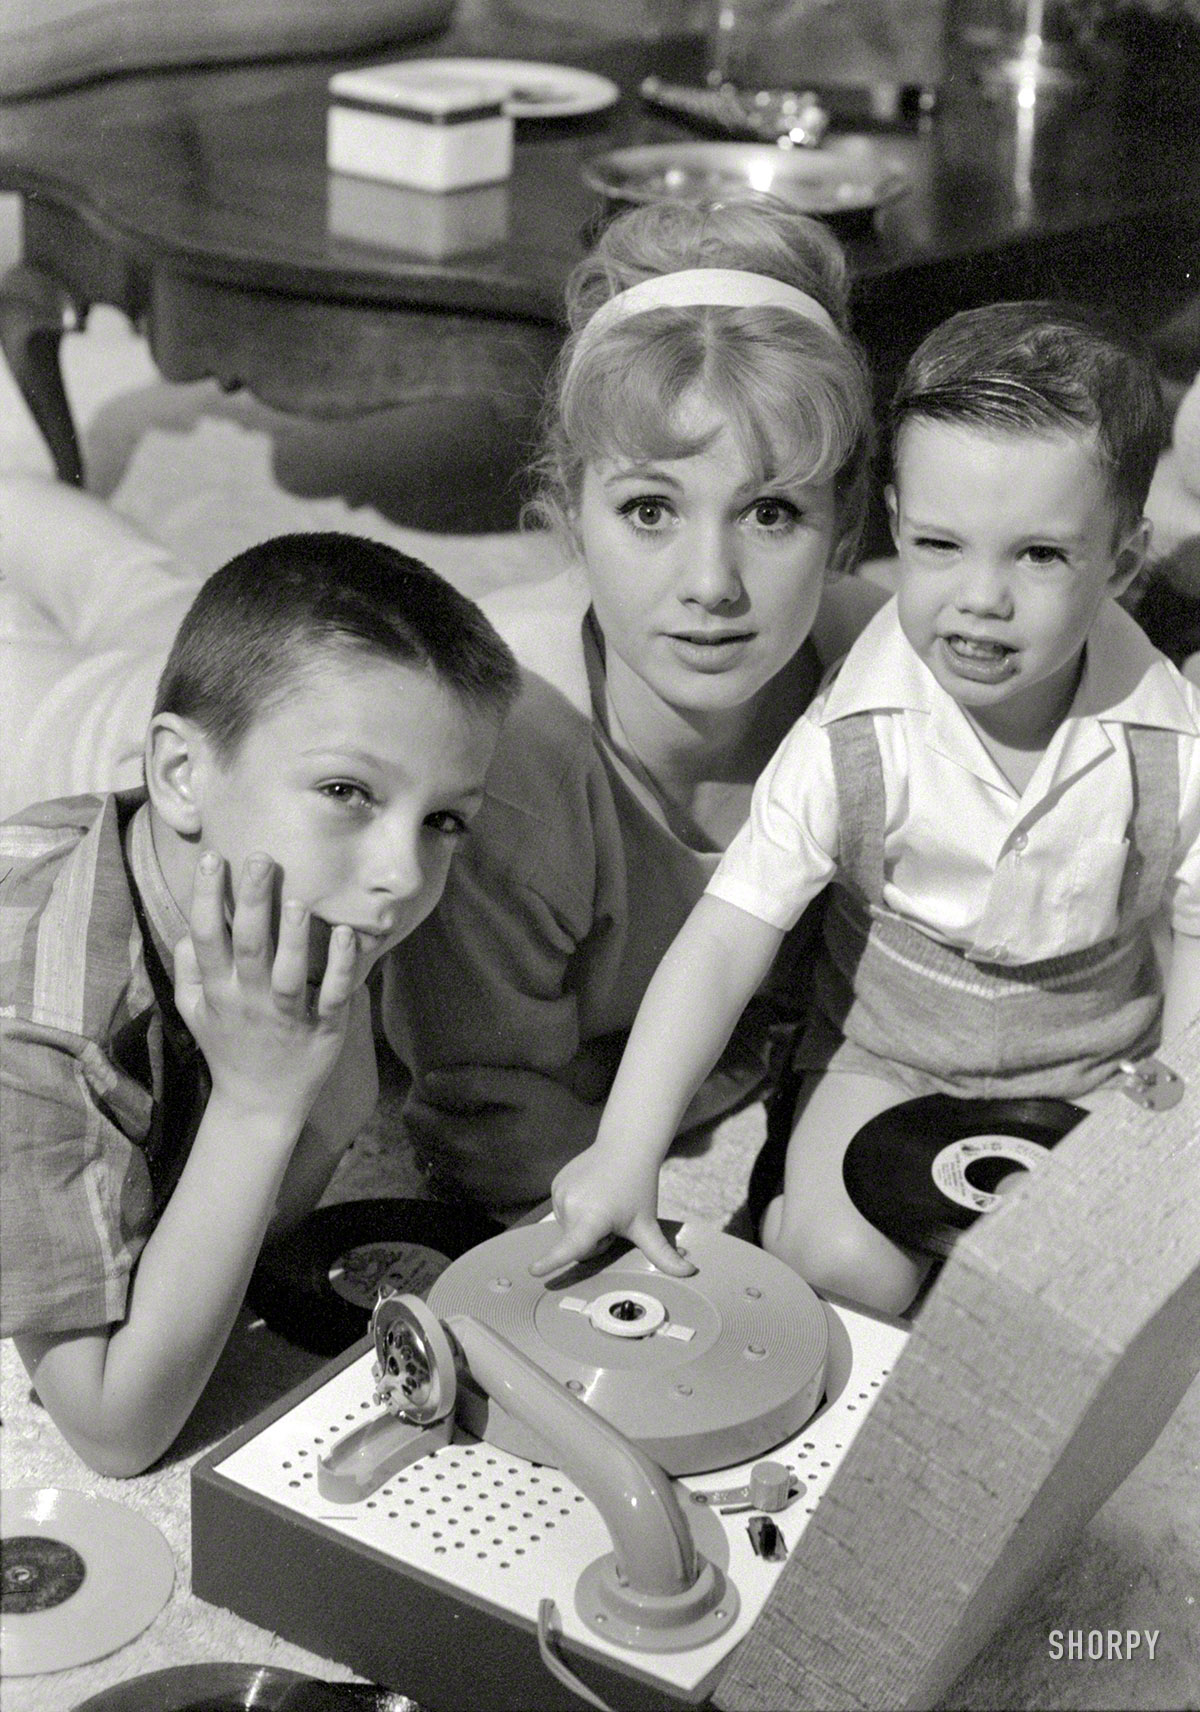 "Music Man" star Shirley Jones in 1961 with her kids, the future pop icons David and Shaun Cassidy. Photo by Earl Theisen for the Look magazine article "The Good Life of a Hollywood Bad Girl." View full size.